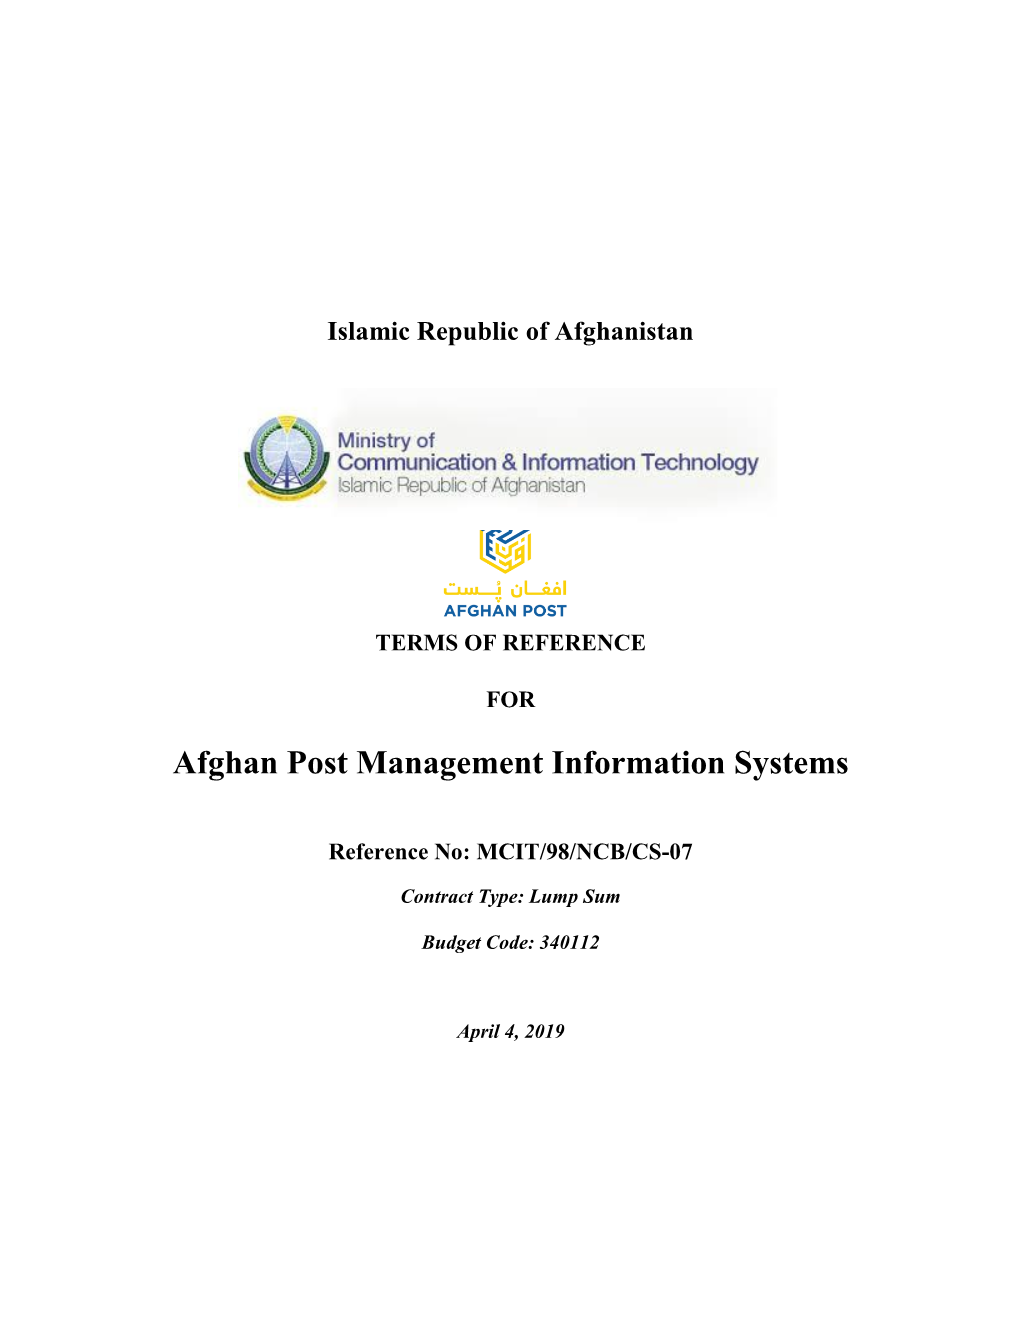 Afghan Post Management Information Systems